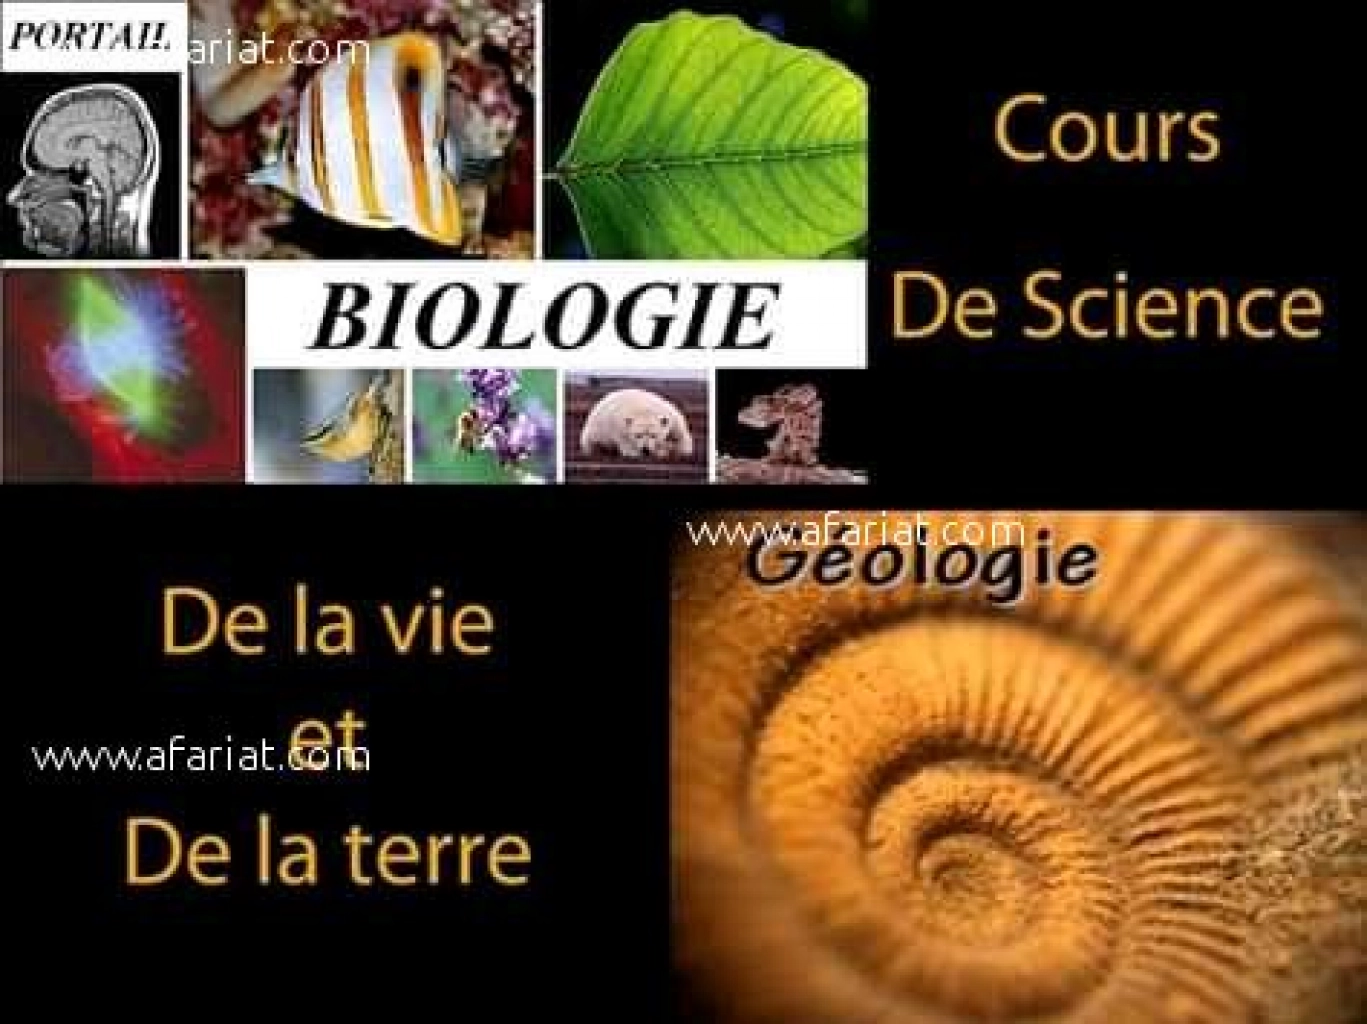 Cours particuliers